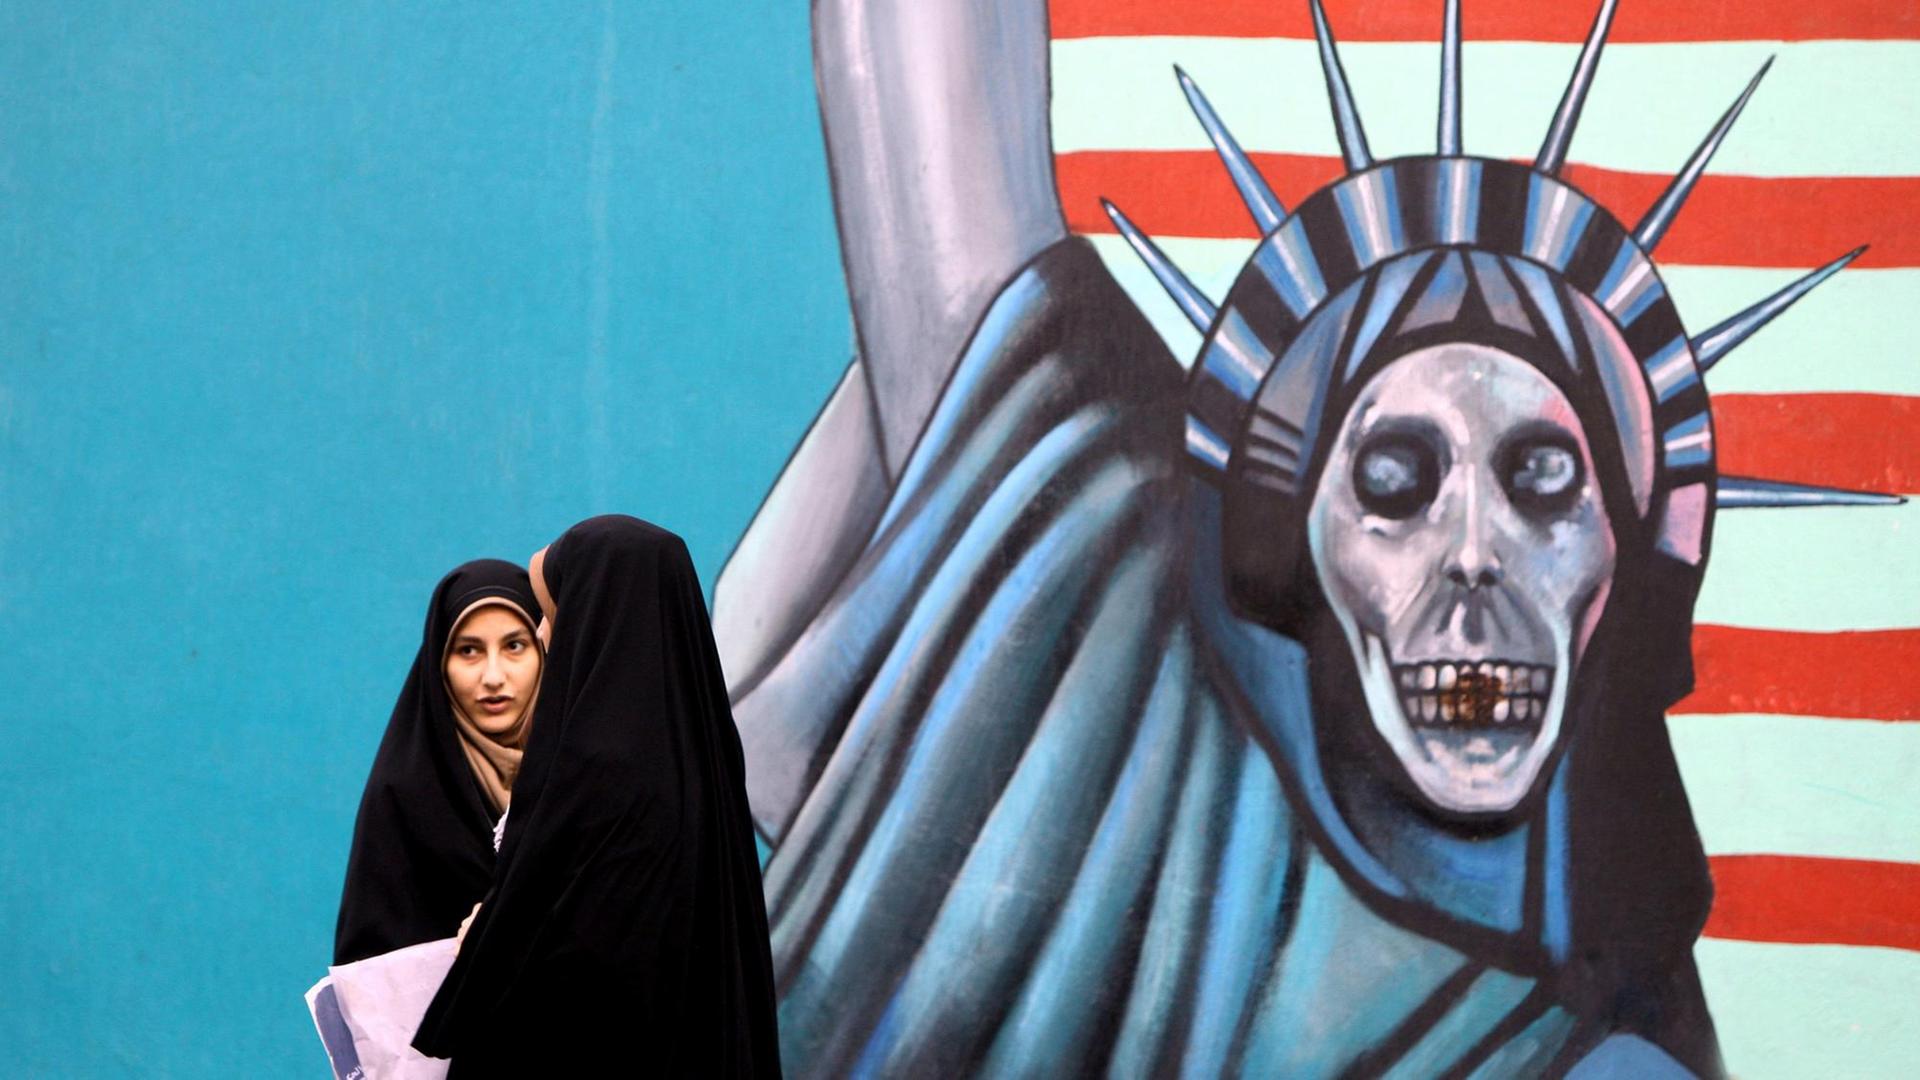 Iranian students walk past a mural outside former US embassy during a demonstration marking the 31th anniversary of US Embassy takeover in Tehran, Iran, 04 November 2010. The rally marks the 31th anniversary of the occupation of the US embassy in Tehran and the 'day of national confrontation against World Imperialism'. Iranian students occupied the embassy on 04 November 1979 after the US granted permission to the late Iranian Shah to be hospitalised in the US. Fifty-three American diplomats and guards were held hostage by students for 444 days. EPA/ABEDIN TAHERKENAREH |